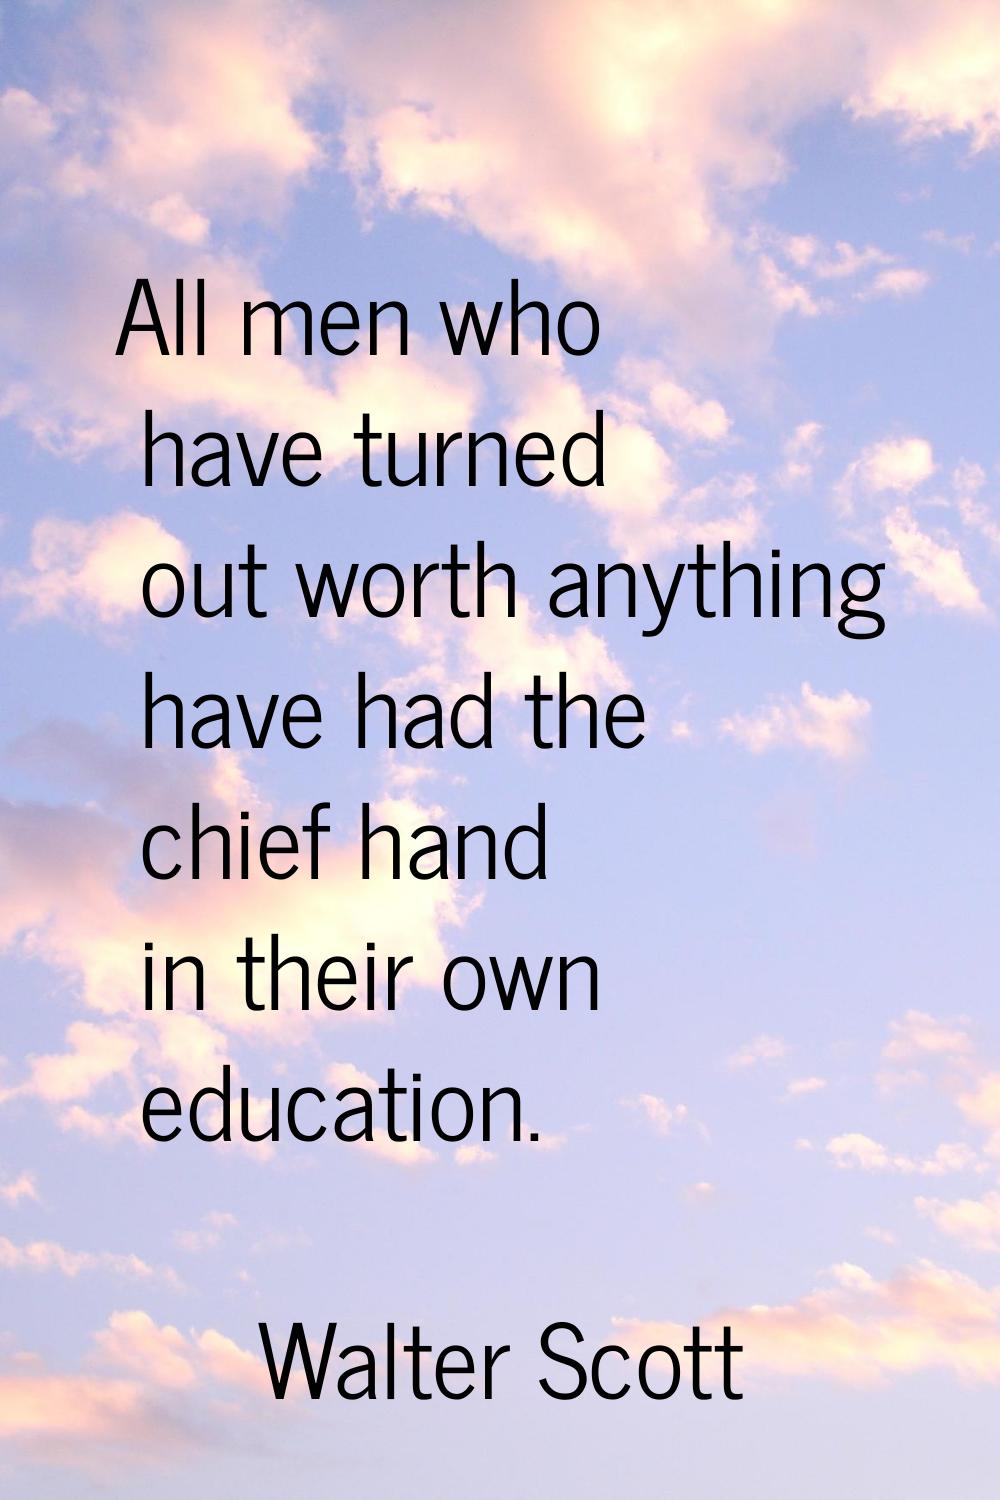 All men who have turned out worth anything have had the chief hand in their own education.